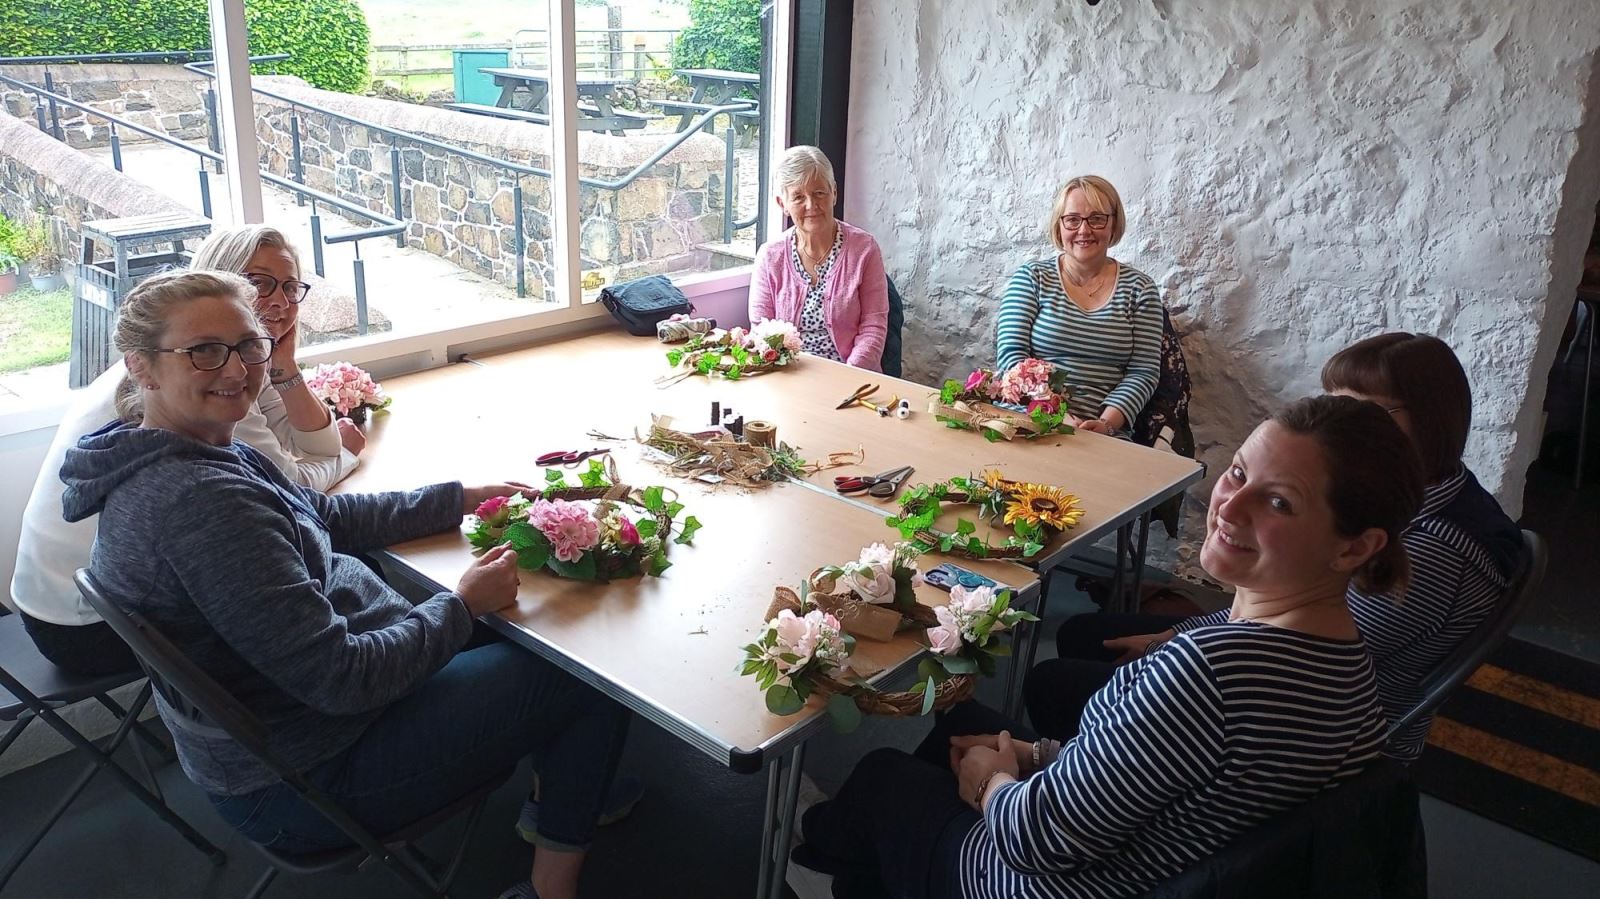 Group of ladies sitting round a table making wreaths